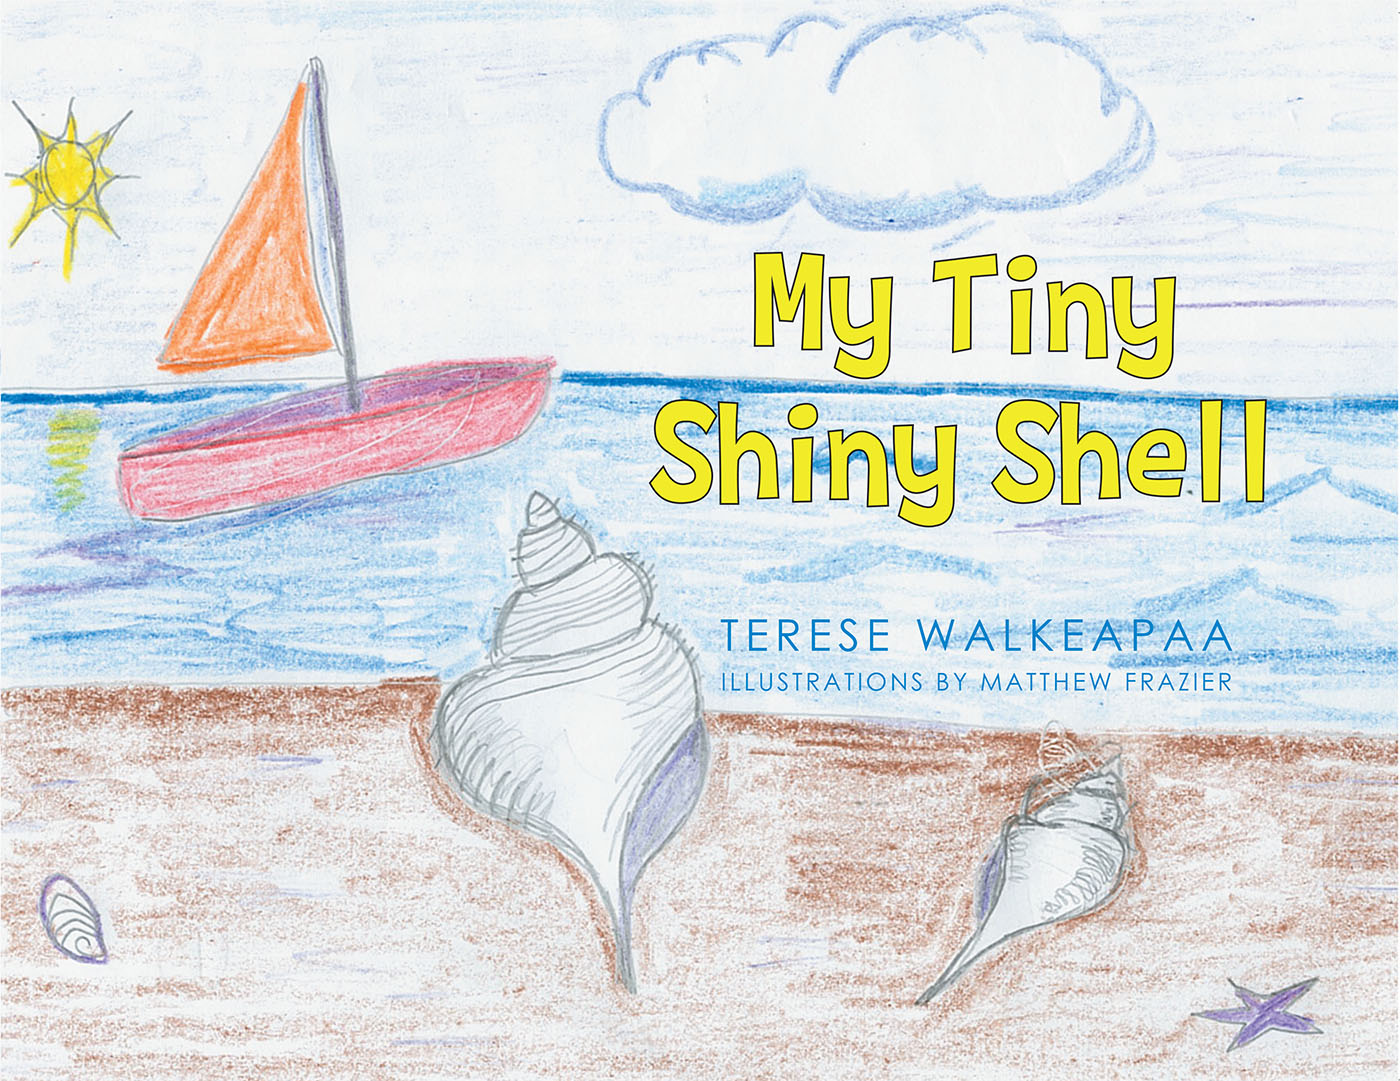 Terese Walkeapaa’s New Book, "My Tiny Shiny Shell," is a Touching Story of the Preciousness That Life Holds, and How the Memories of Loved Ones Continue to Live on